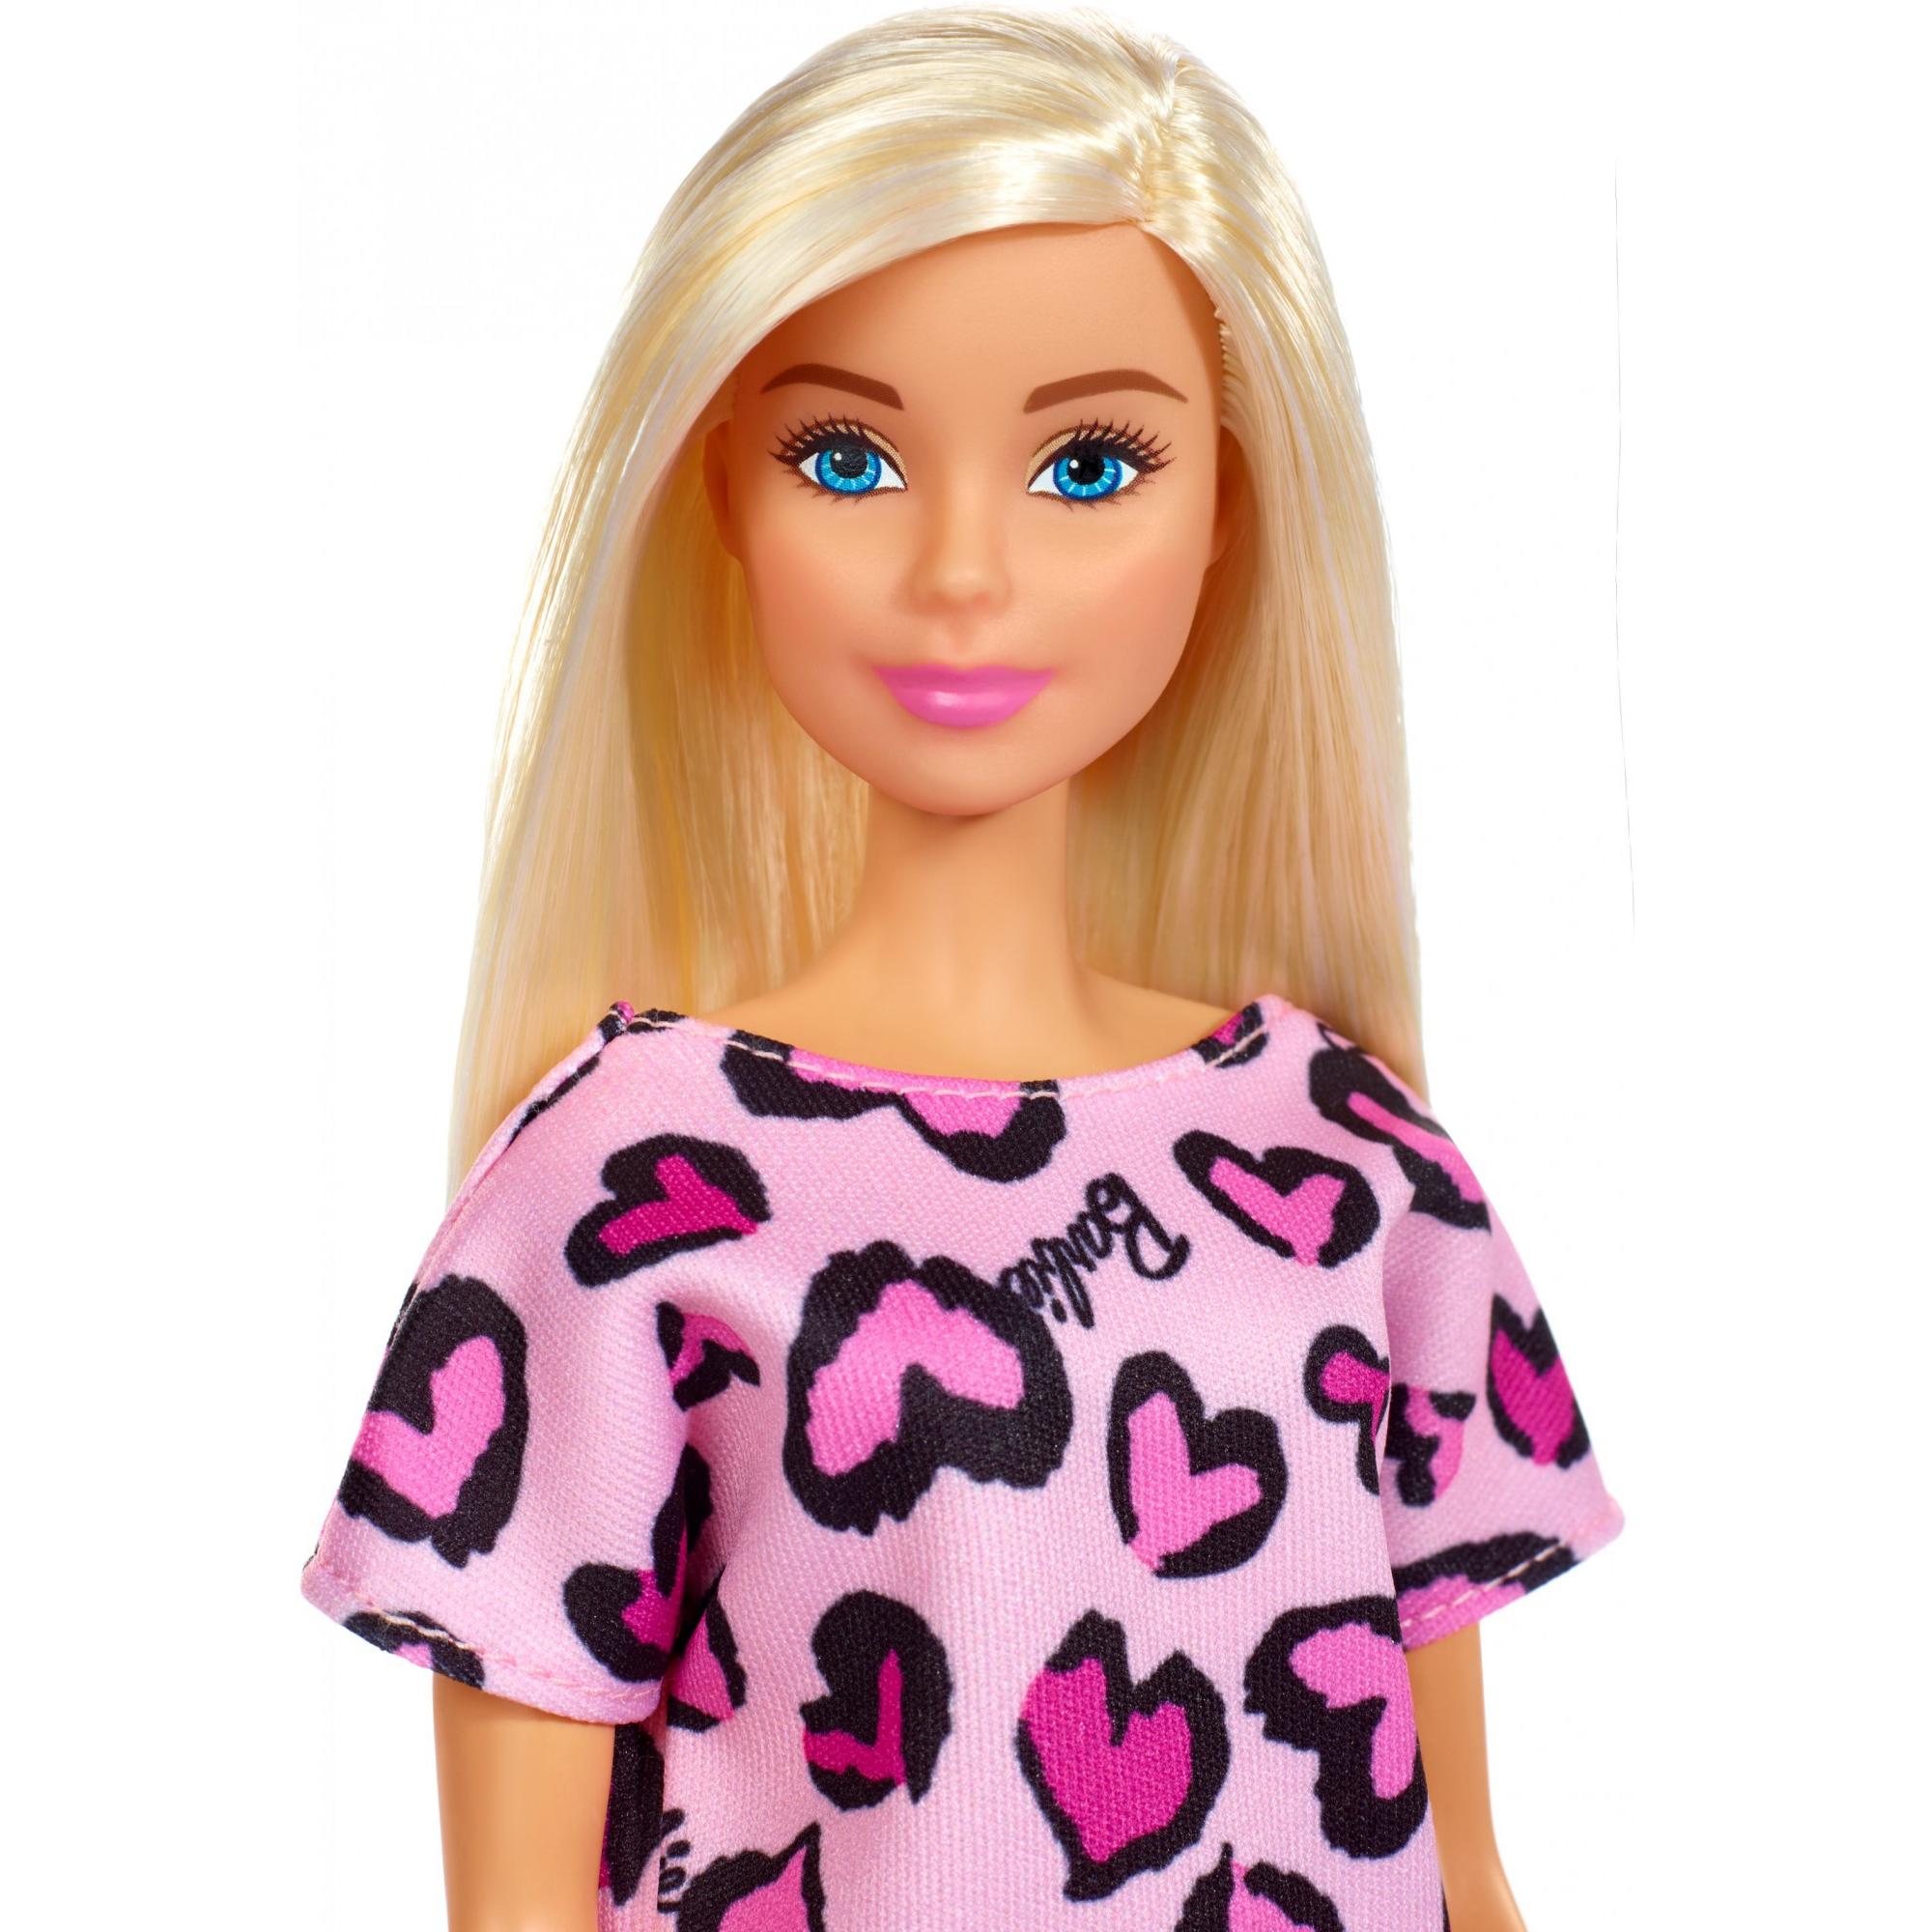 Barbie Doll, Blonde, Wearing Pink Heart-Print Dress And Shoes - image 3 of 6